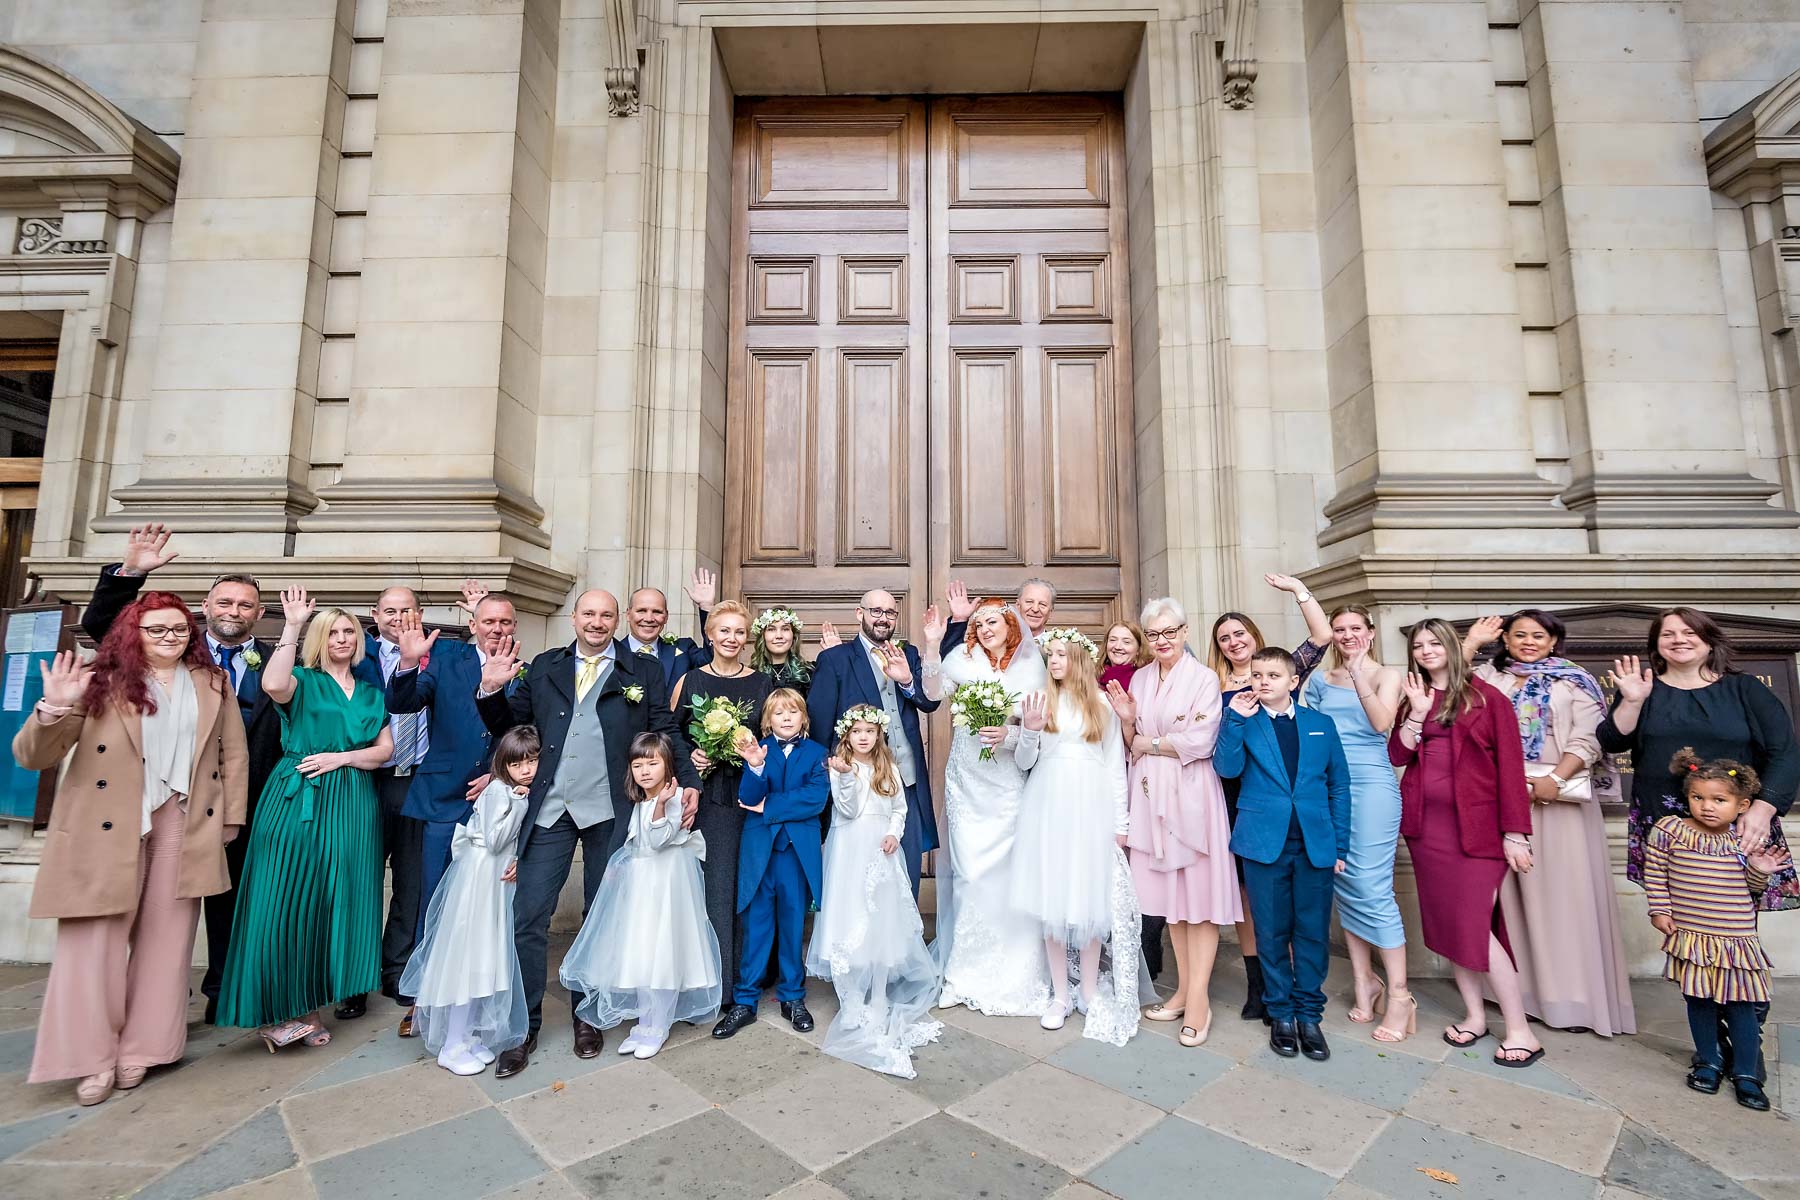 Group shot of all wedding guests outside Brompton Oratory in Knightsbridge, London